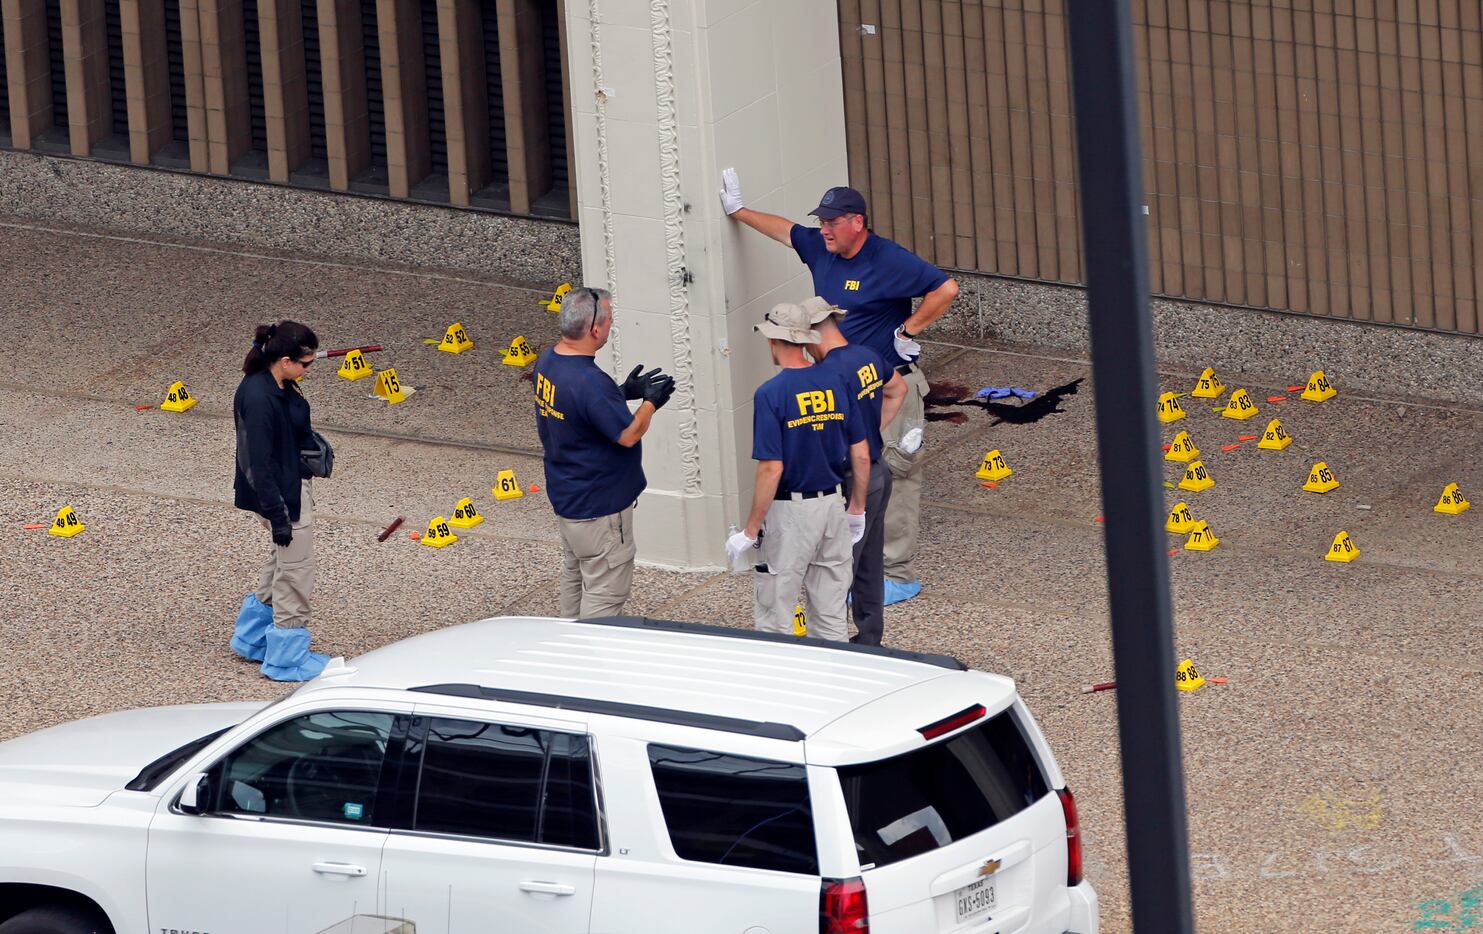 On July 9, two days after the ambush, members of an FBI evidence response team gathered...